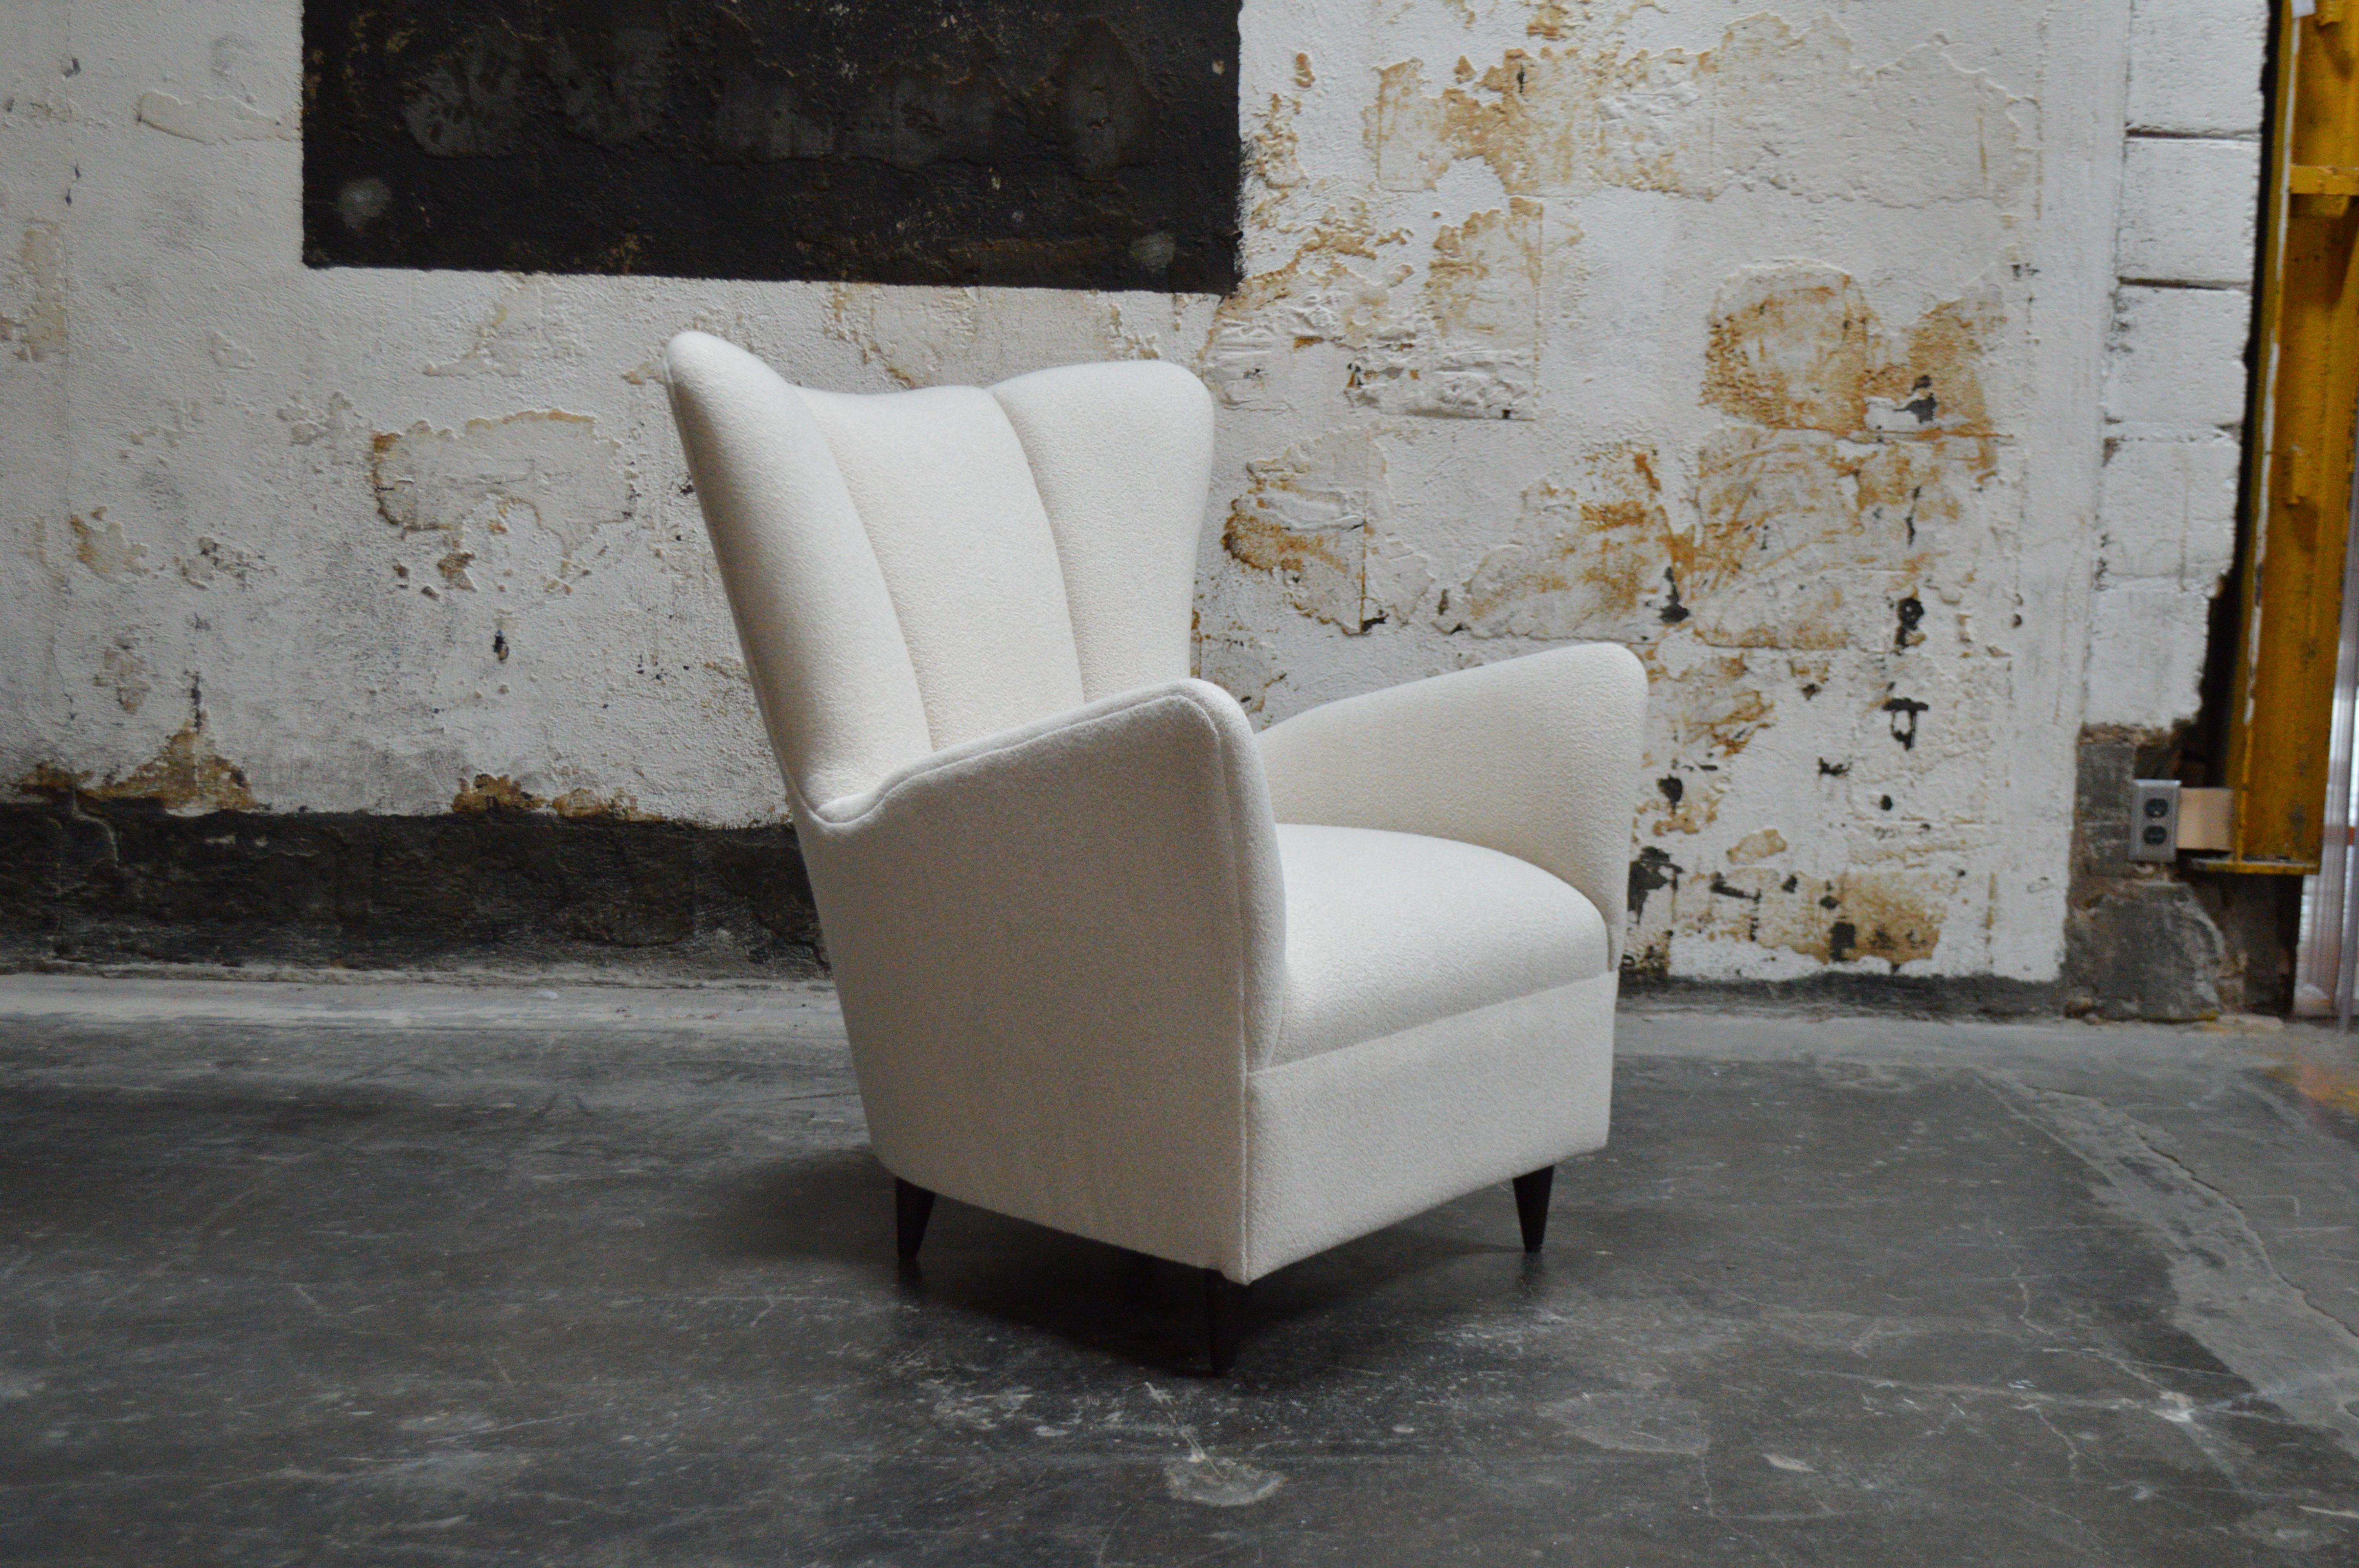 This impressive Scandinavian Modern chair features a tall channeled back, newly restored upholstery, and sturdy wooden legs. It has been restored and reupholstered in an off white bouclé fabric. This comfortable chair would make a great addition to